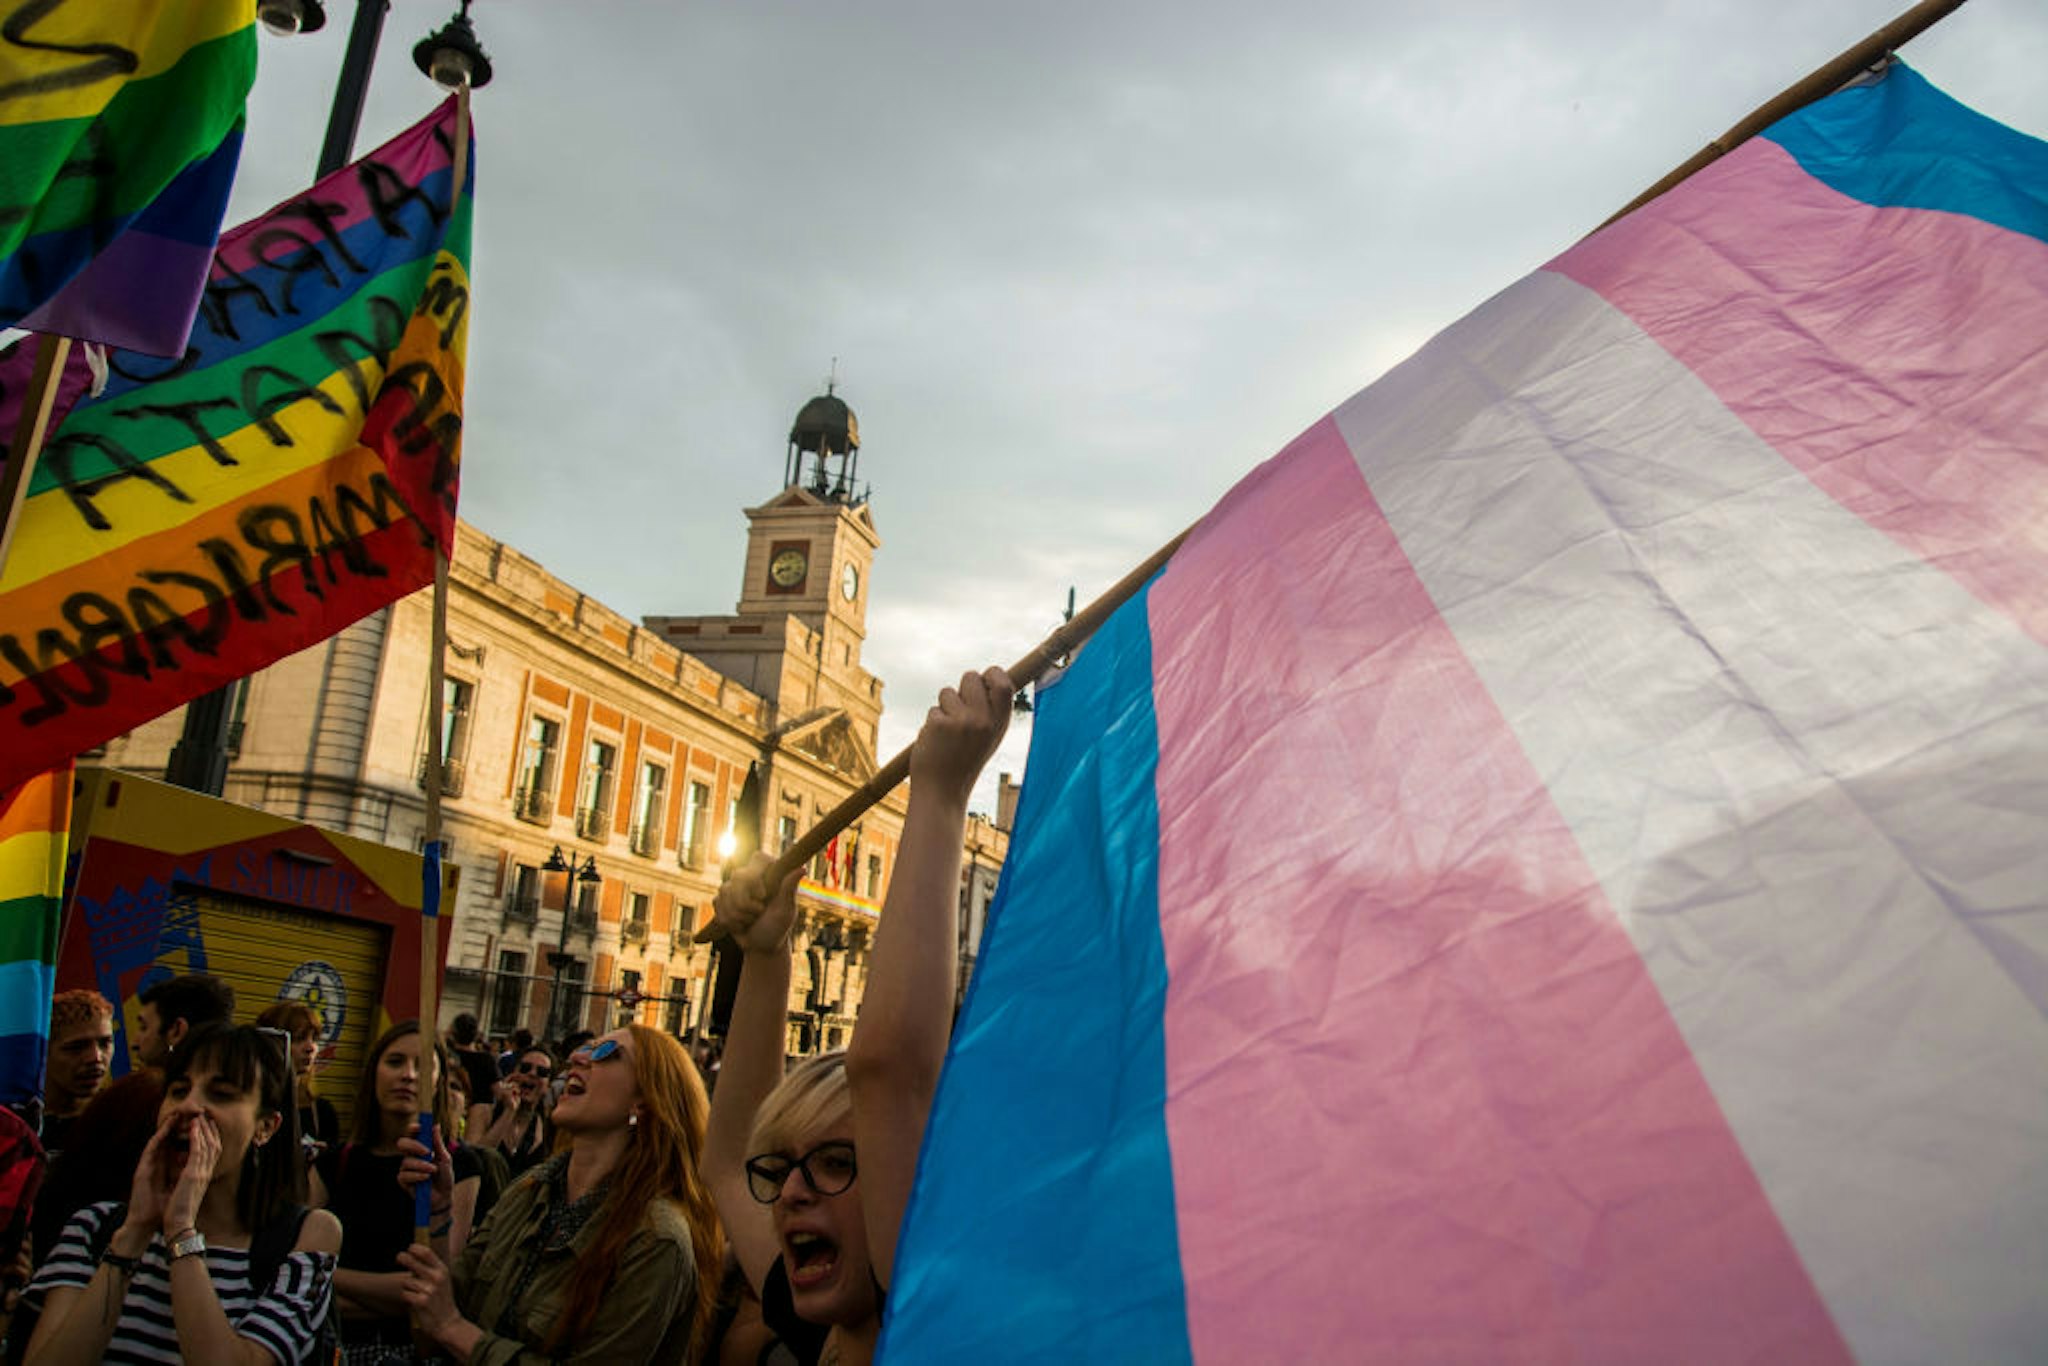 MADRID, SPAIN - 2017/05/17: People waving the rainbow flag during a demonstration for the International Day against Homophobia, Transphobia and Biphobia. (Photo by Marcos del Mazo/LightRocket via Getty Images)